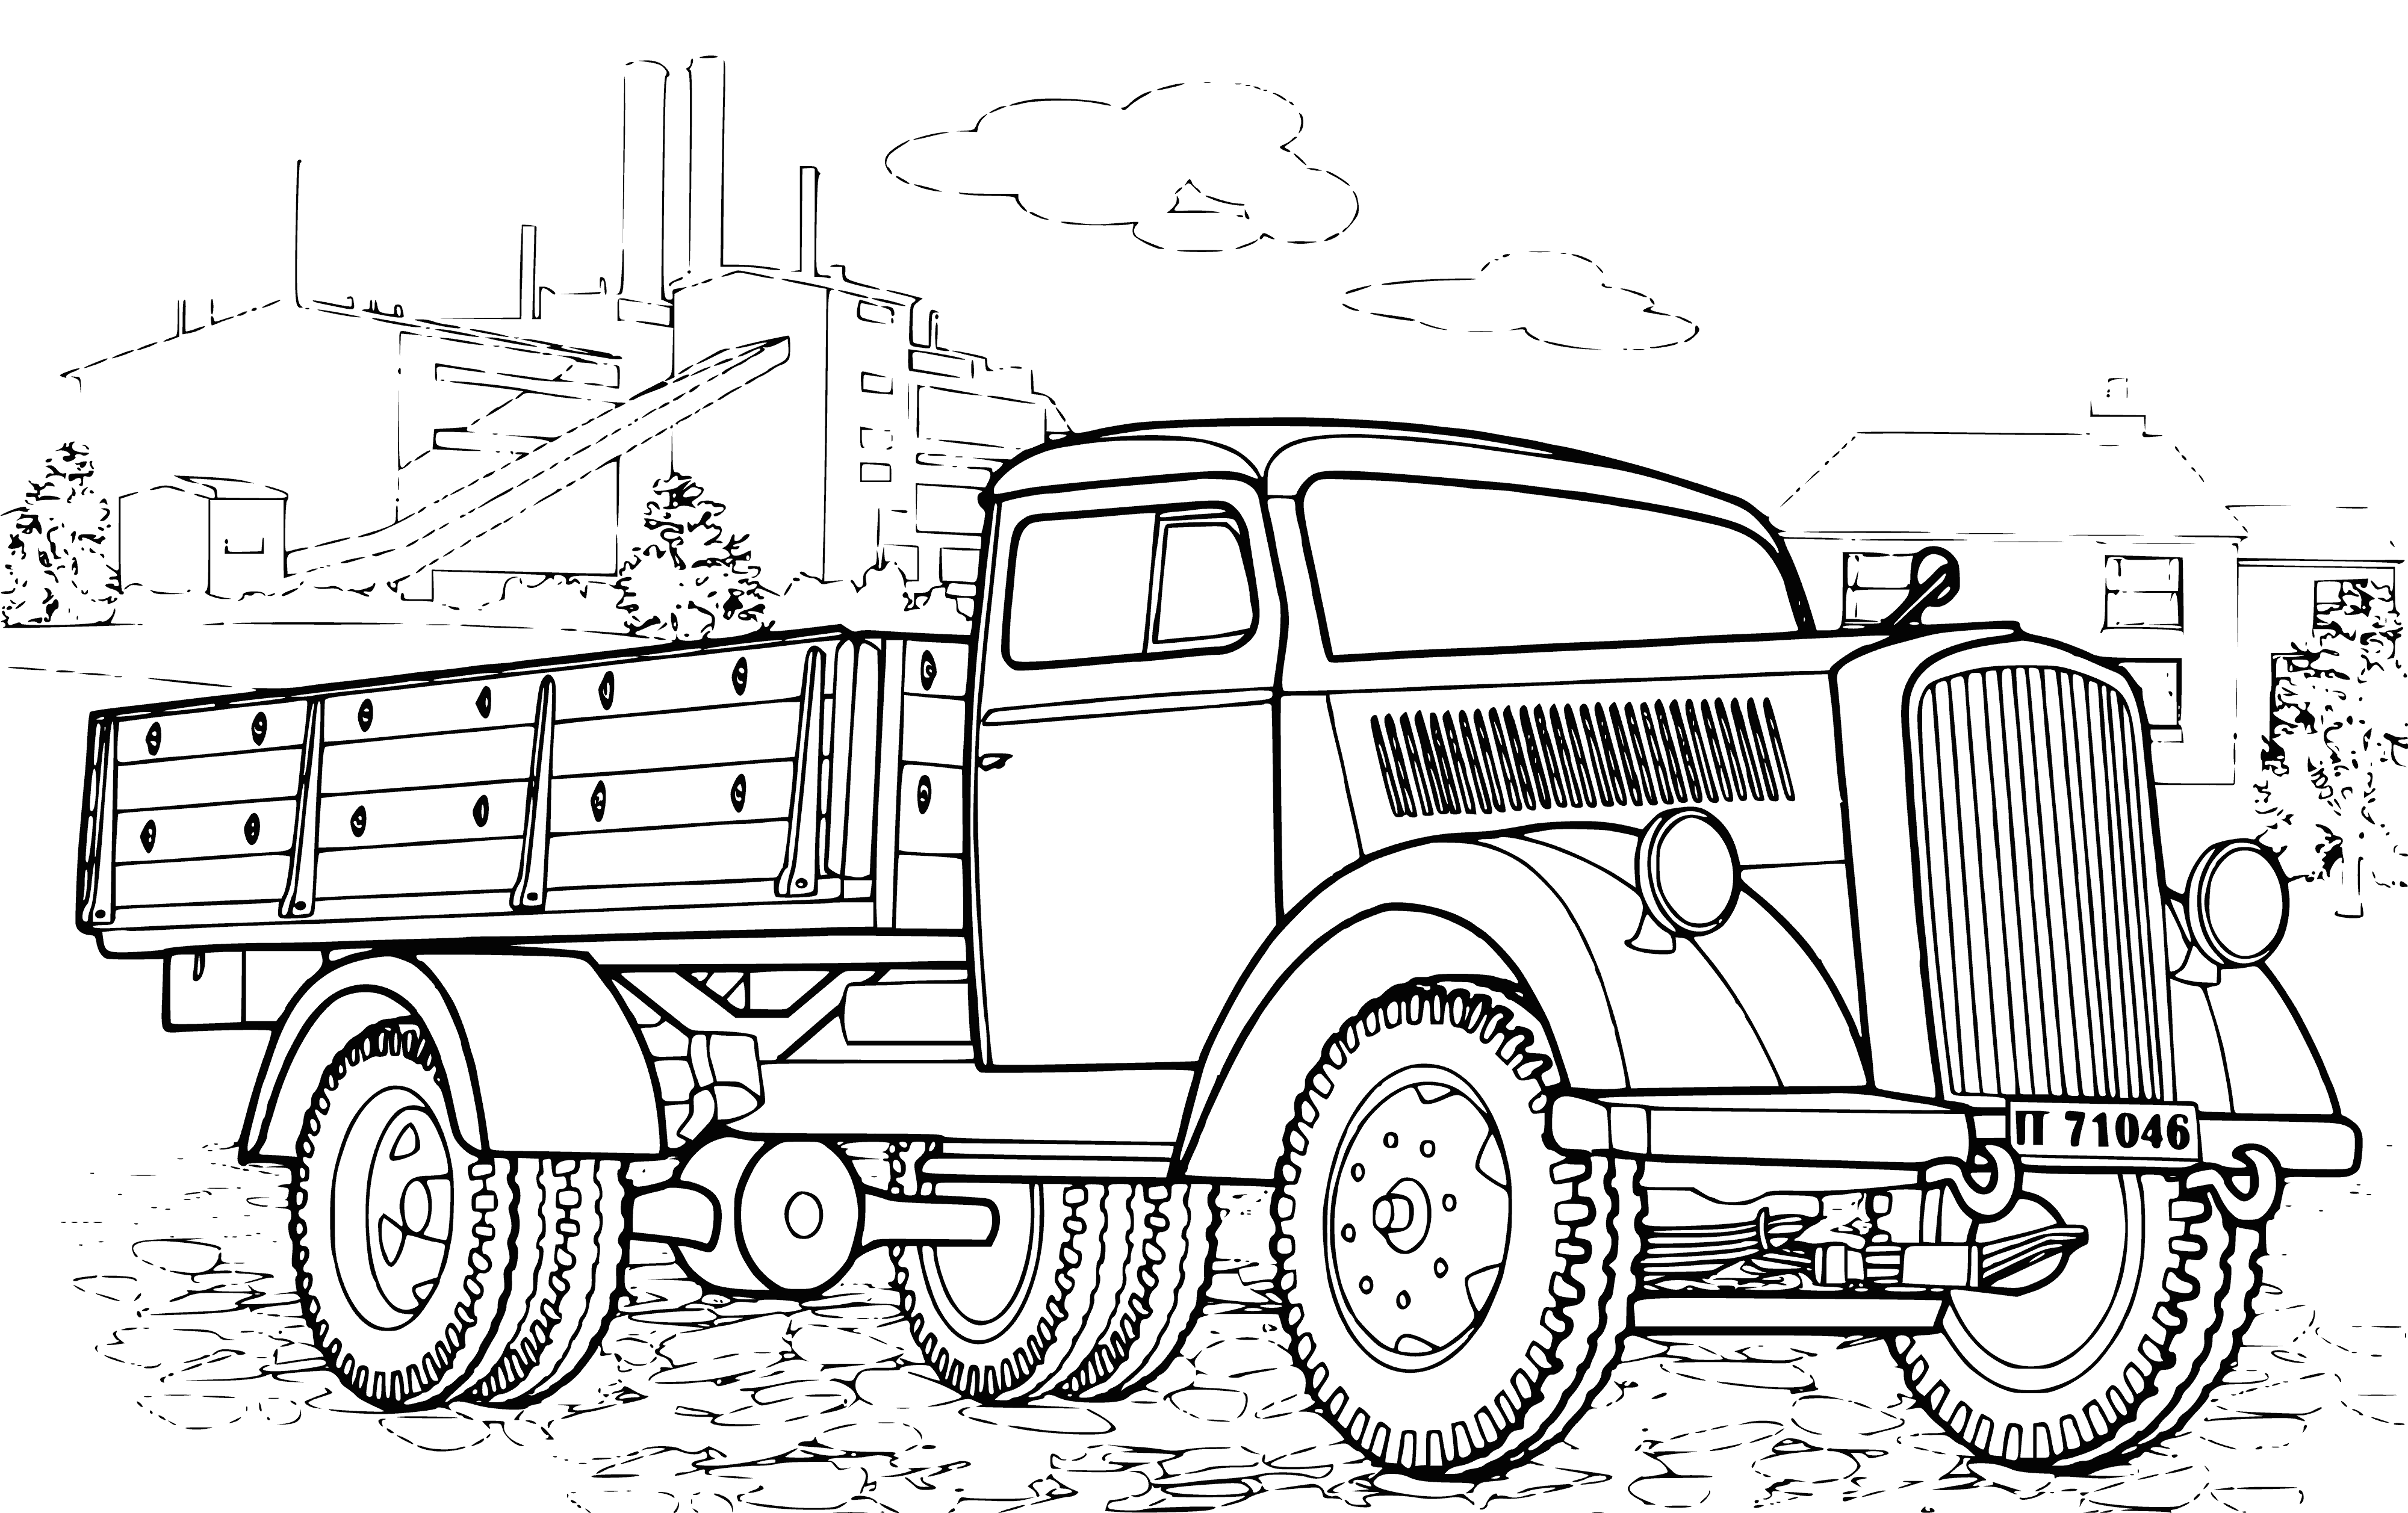 coloring page: Man drives vintage 4-door, 4-wheel car, possible Opel Blitz S3, with passenger. Dark color, possibly blue. #oldcars #traveling